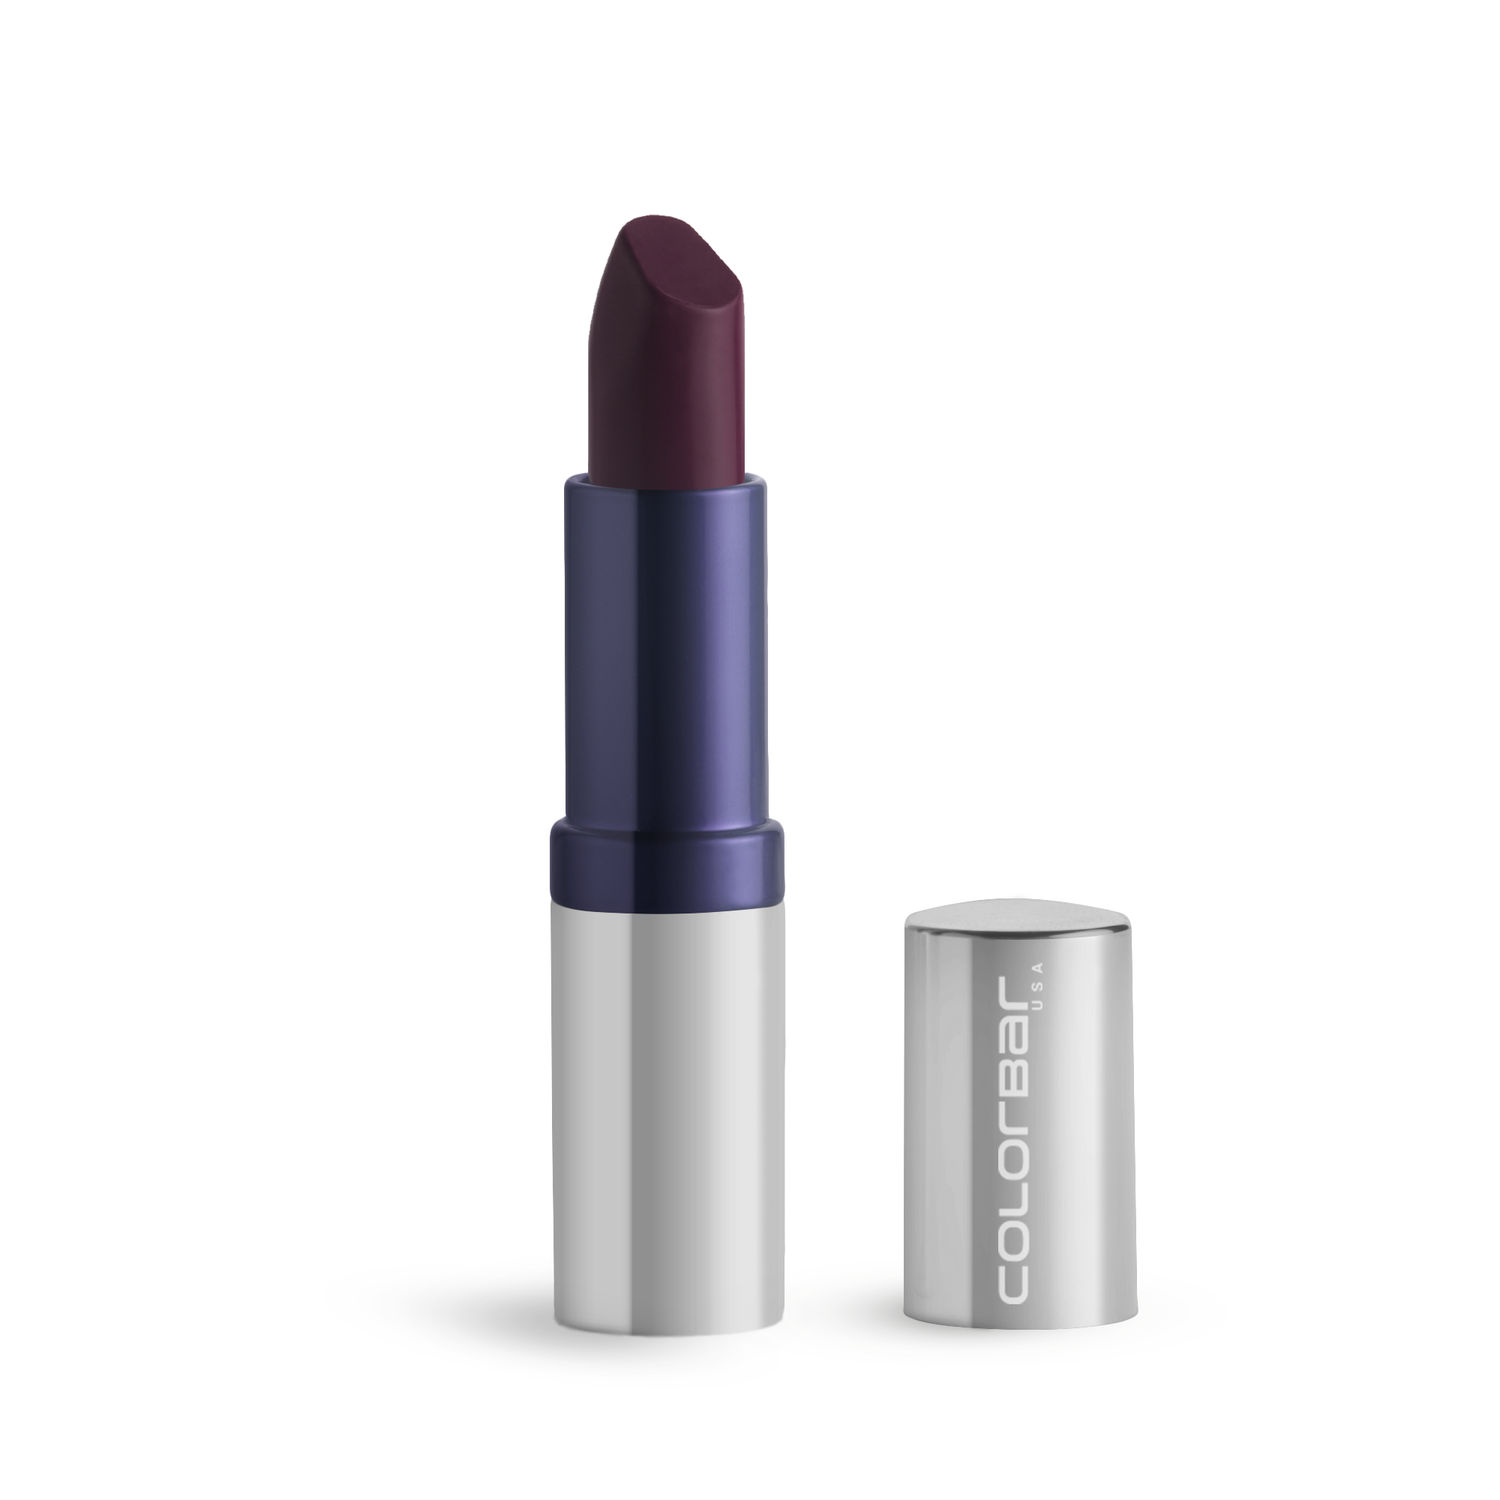 Buy Colorbar Creme Touch Lipstick, Deeply Mauved - Pink (4.2 g) - Purplle